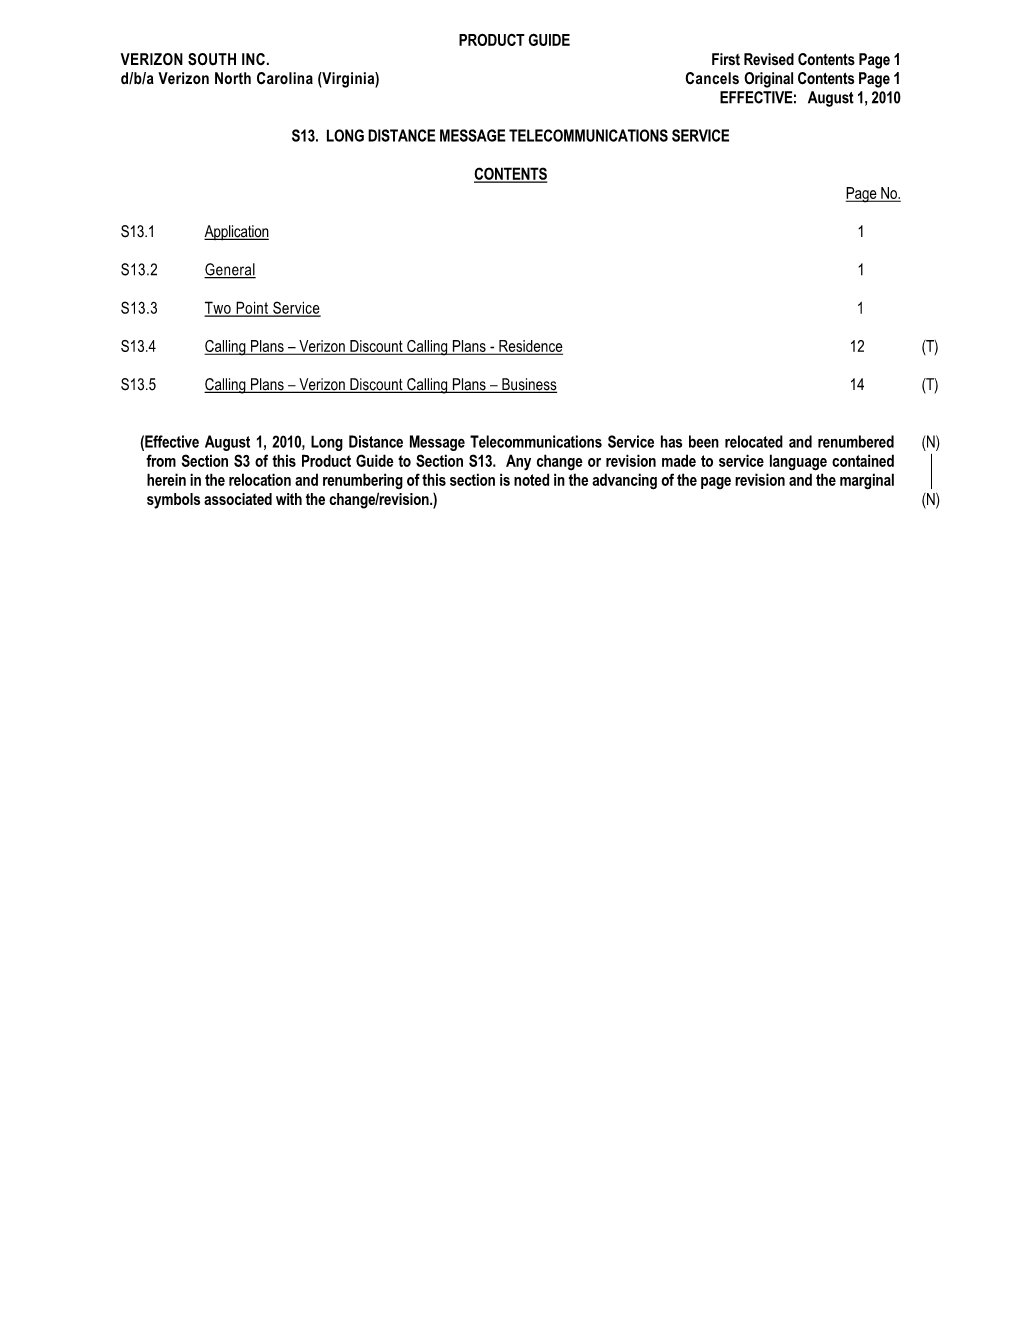 PRODUCT GUIDE VERIZON SOUTH INC. First Revised Contents Page 1 D/B/A Verizon North Carolina (Virginia) Cancels Original Contents Page 1 EFFECTIVE: August 1, 2010